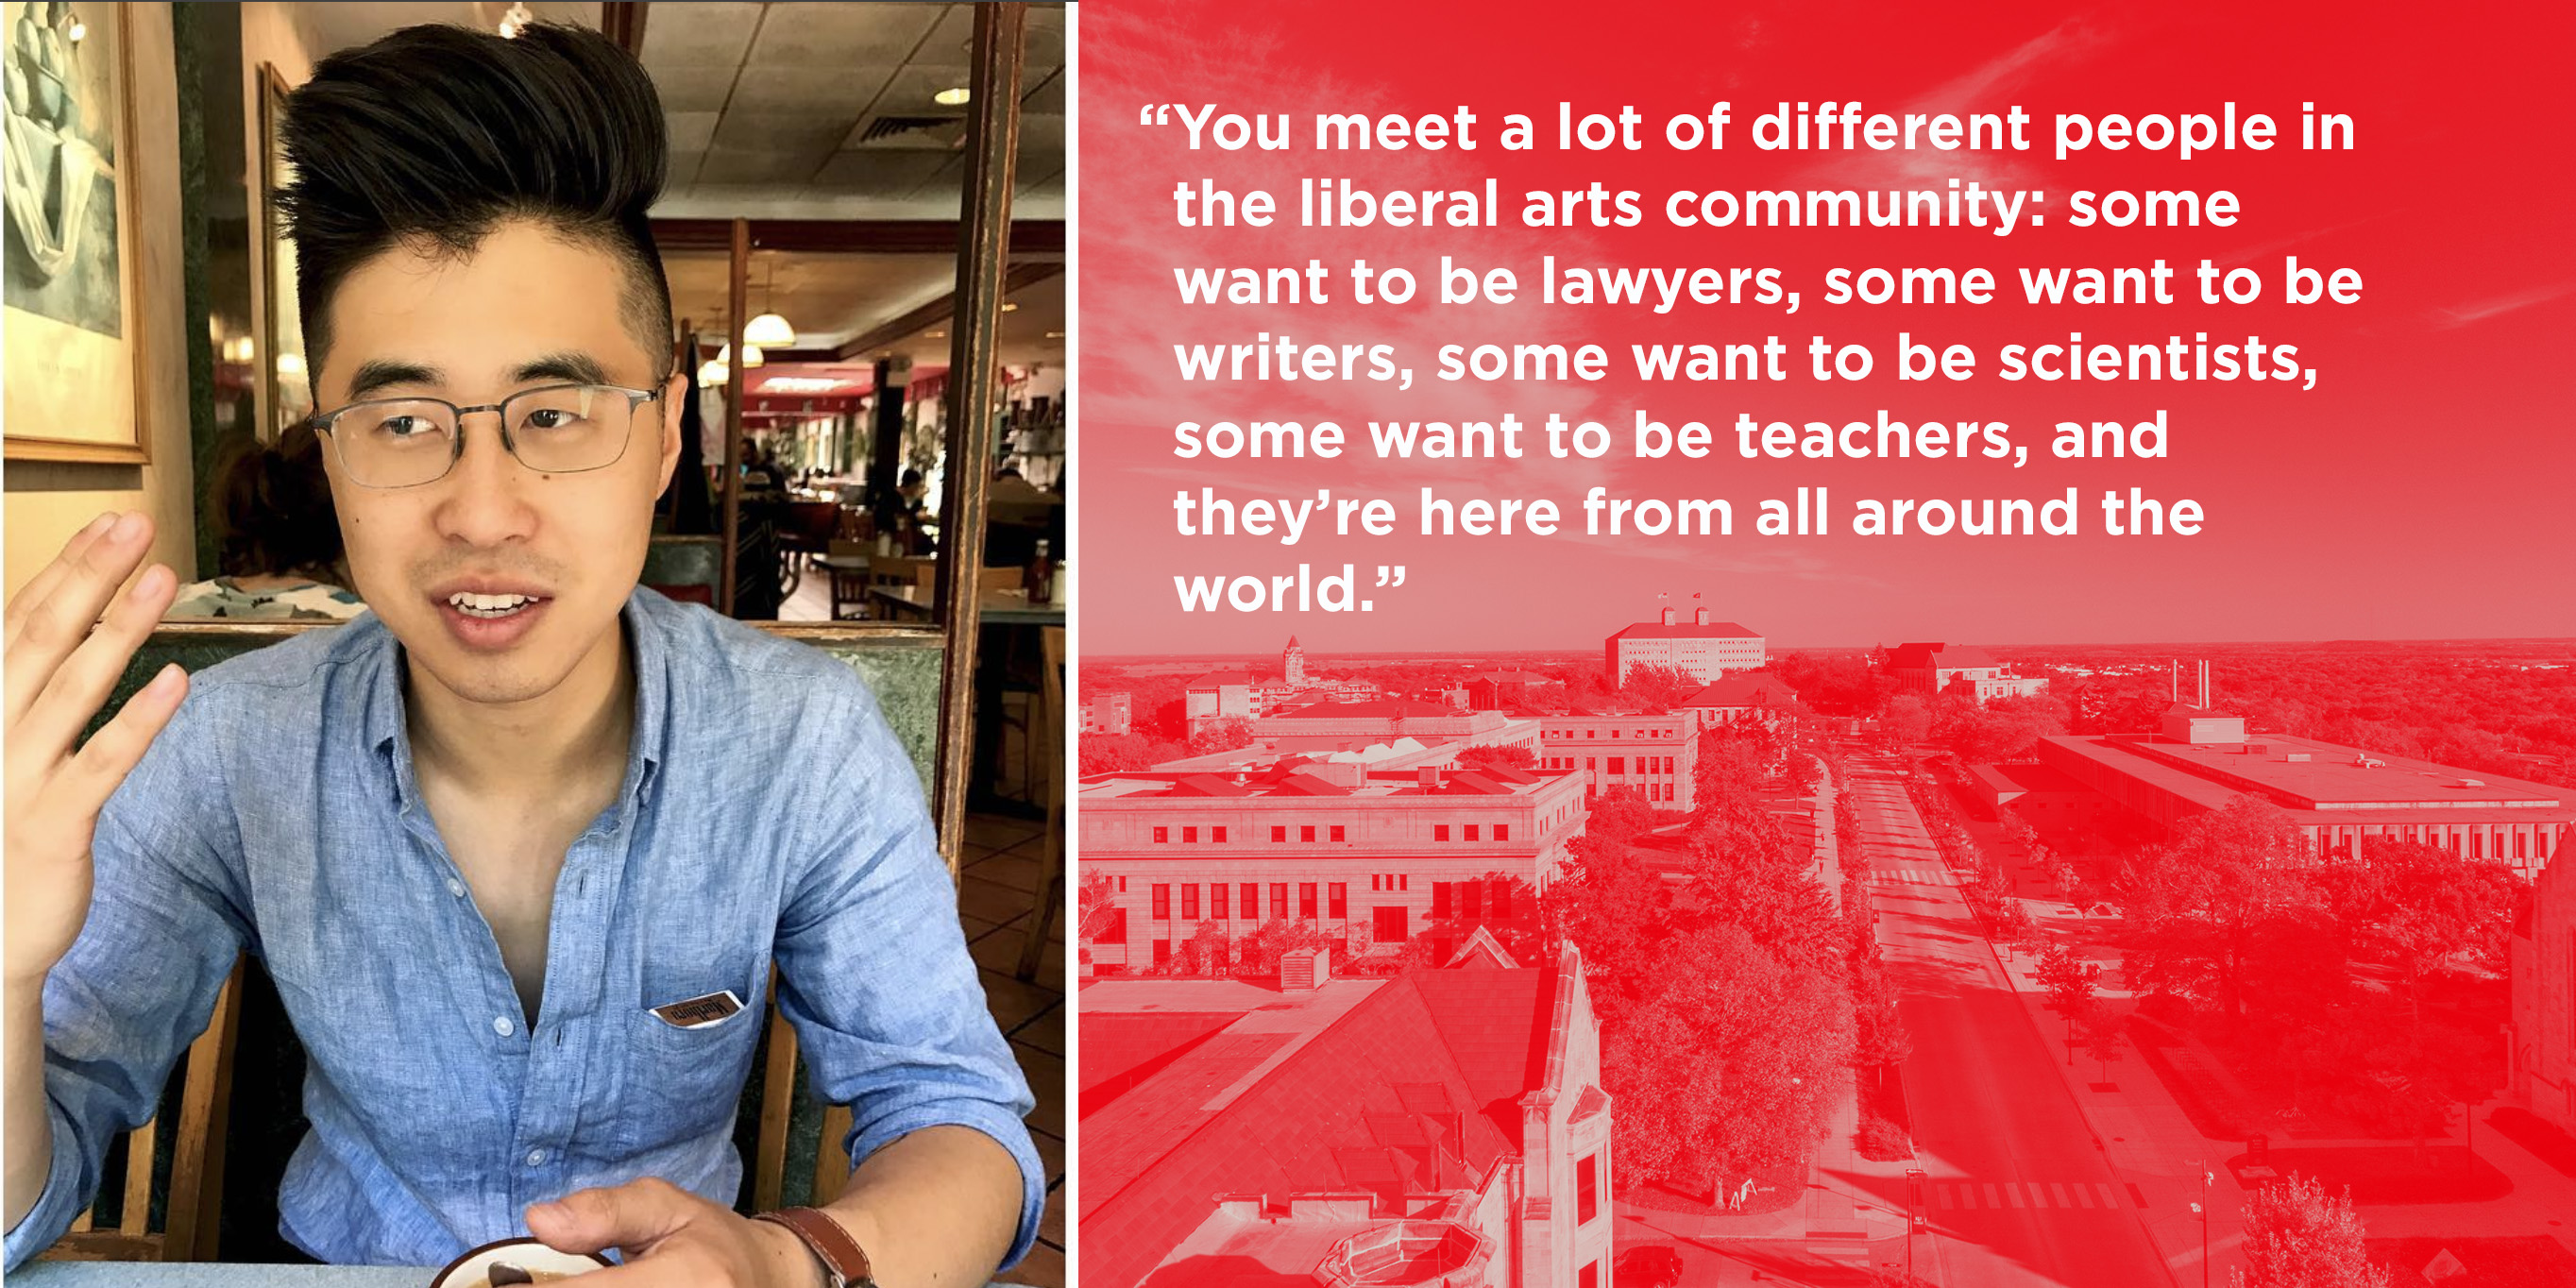 You meet a lot of different people in the liberal arts community: some want to be lawyers, some want to be writers, some want to be scientists, some want to be teachers, and they’re here from all around the world. "